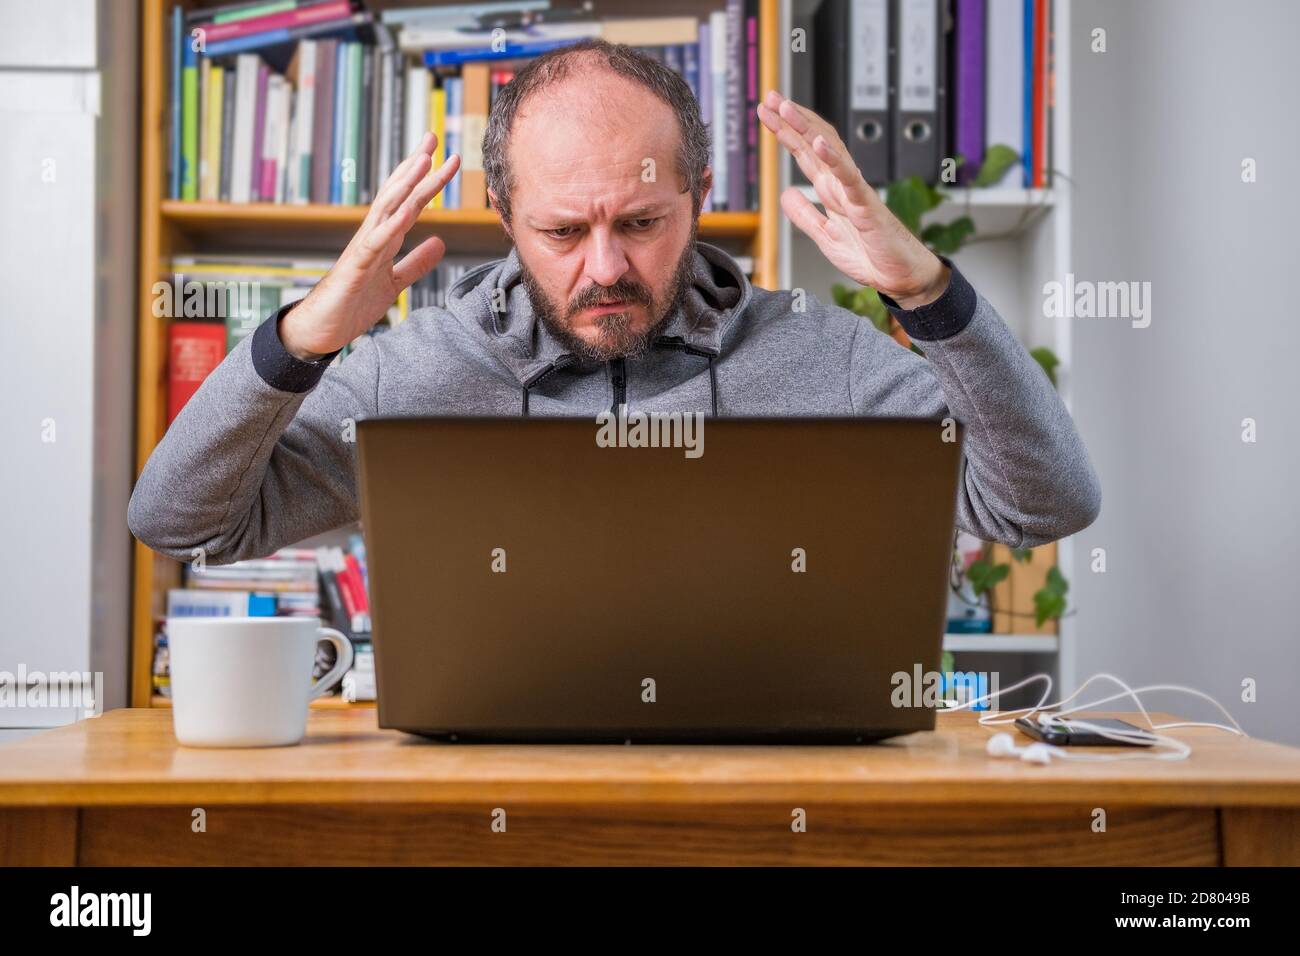 Angry man working online from home office on computer laptop behind vintage desk, arms gesture, business problem concept Stock Photo